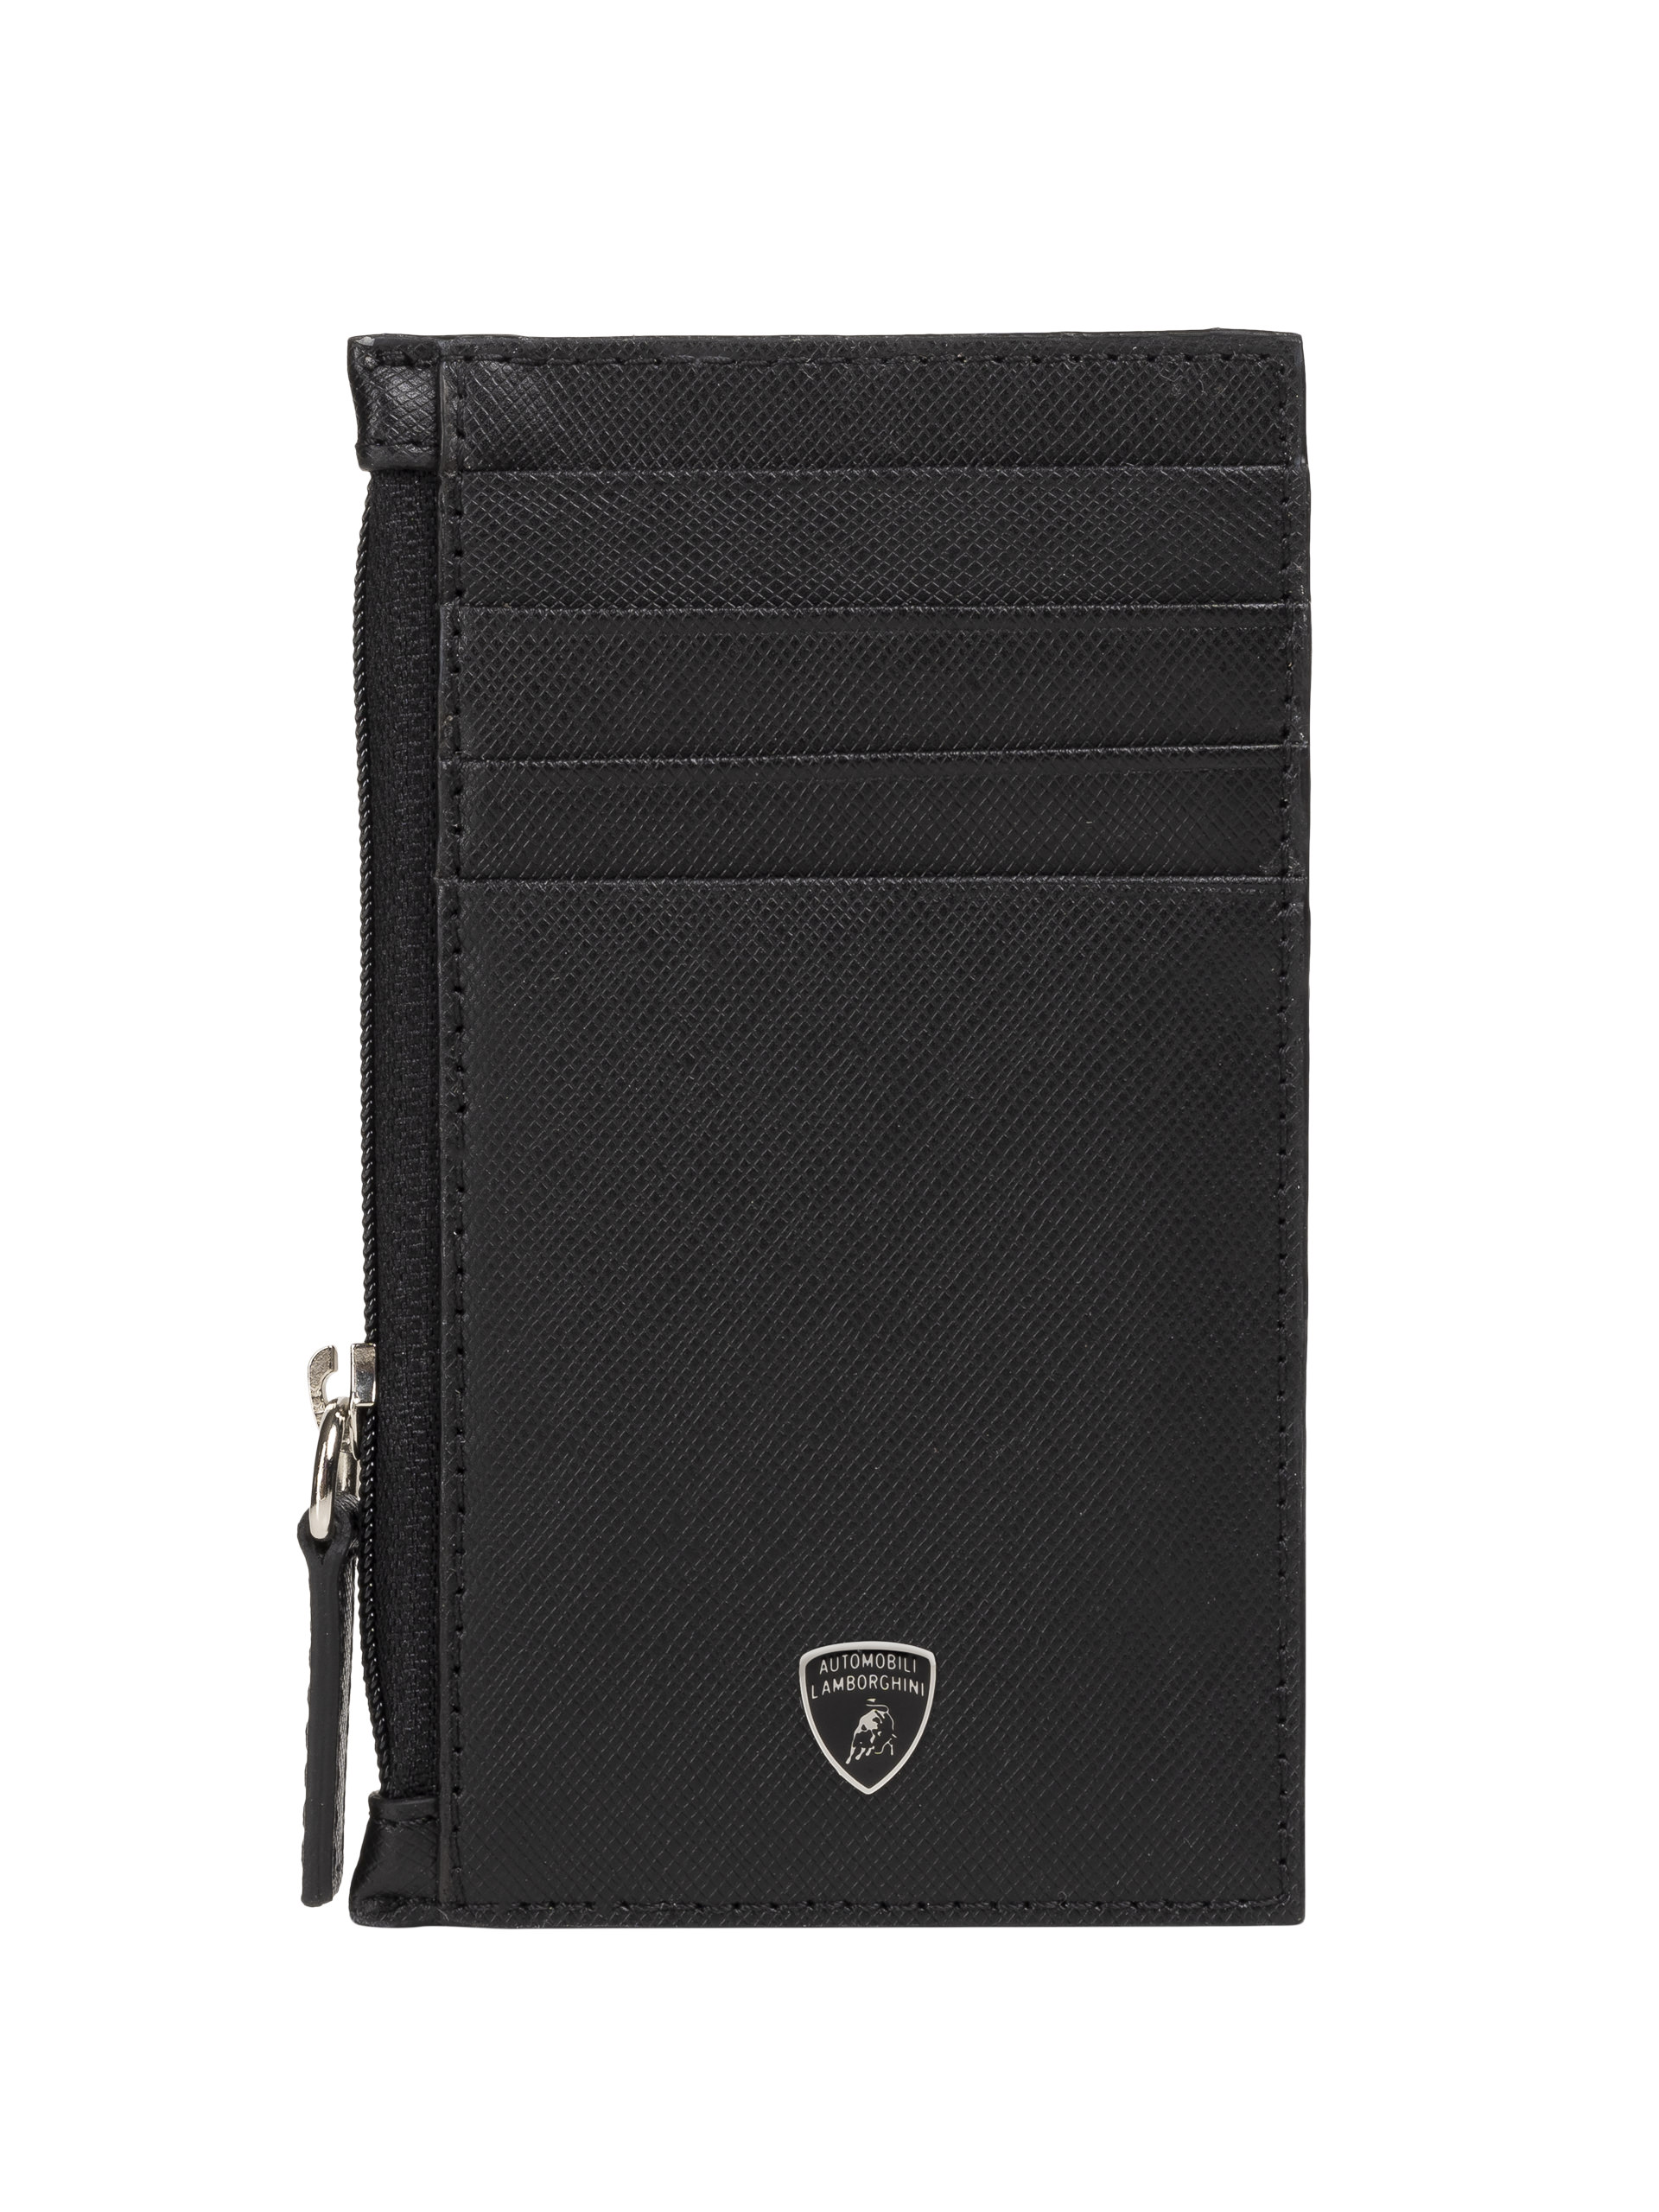 Men's Real Leather Smooth RFID Wallet - 6 card slots - Barneys